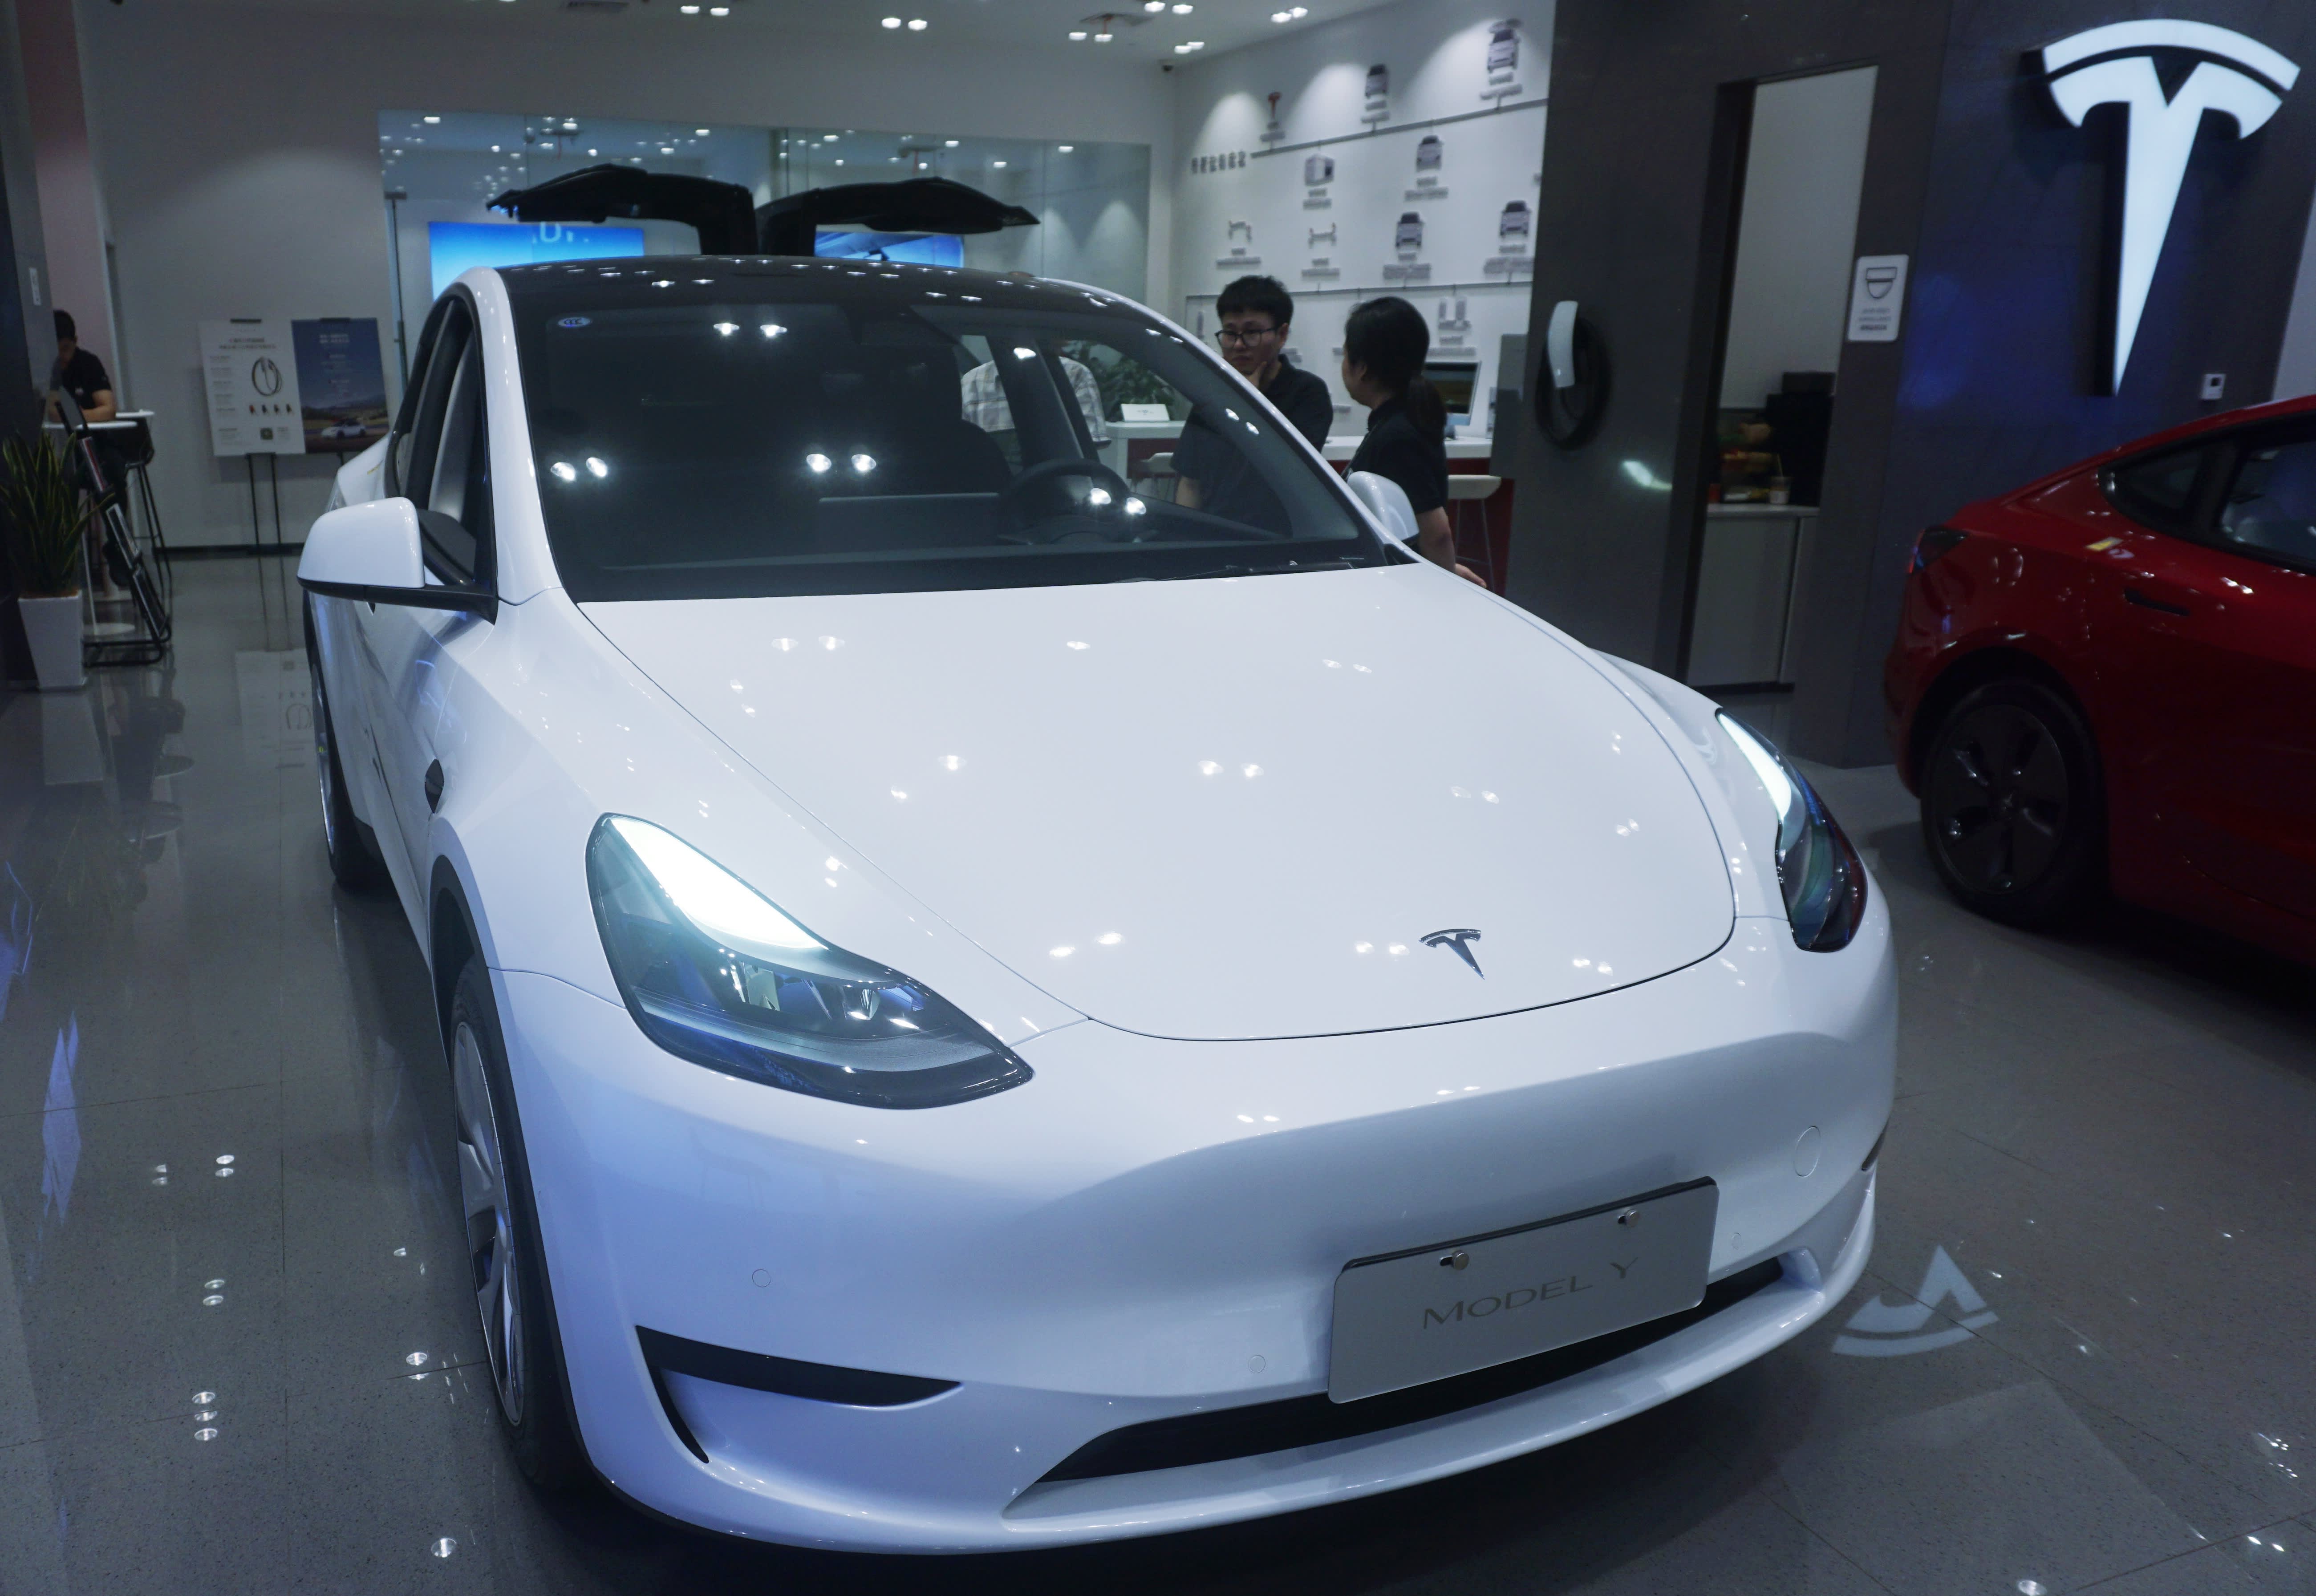 Tesla launches new Model 3 in China, Europe with longer driving range